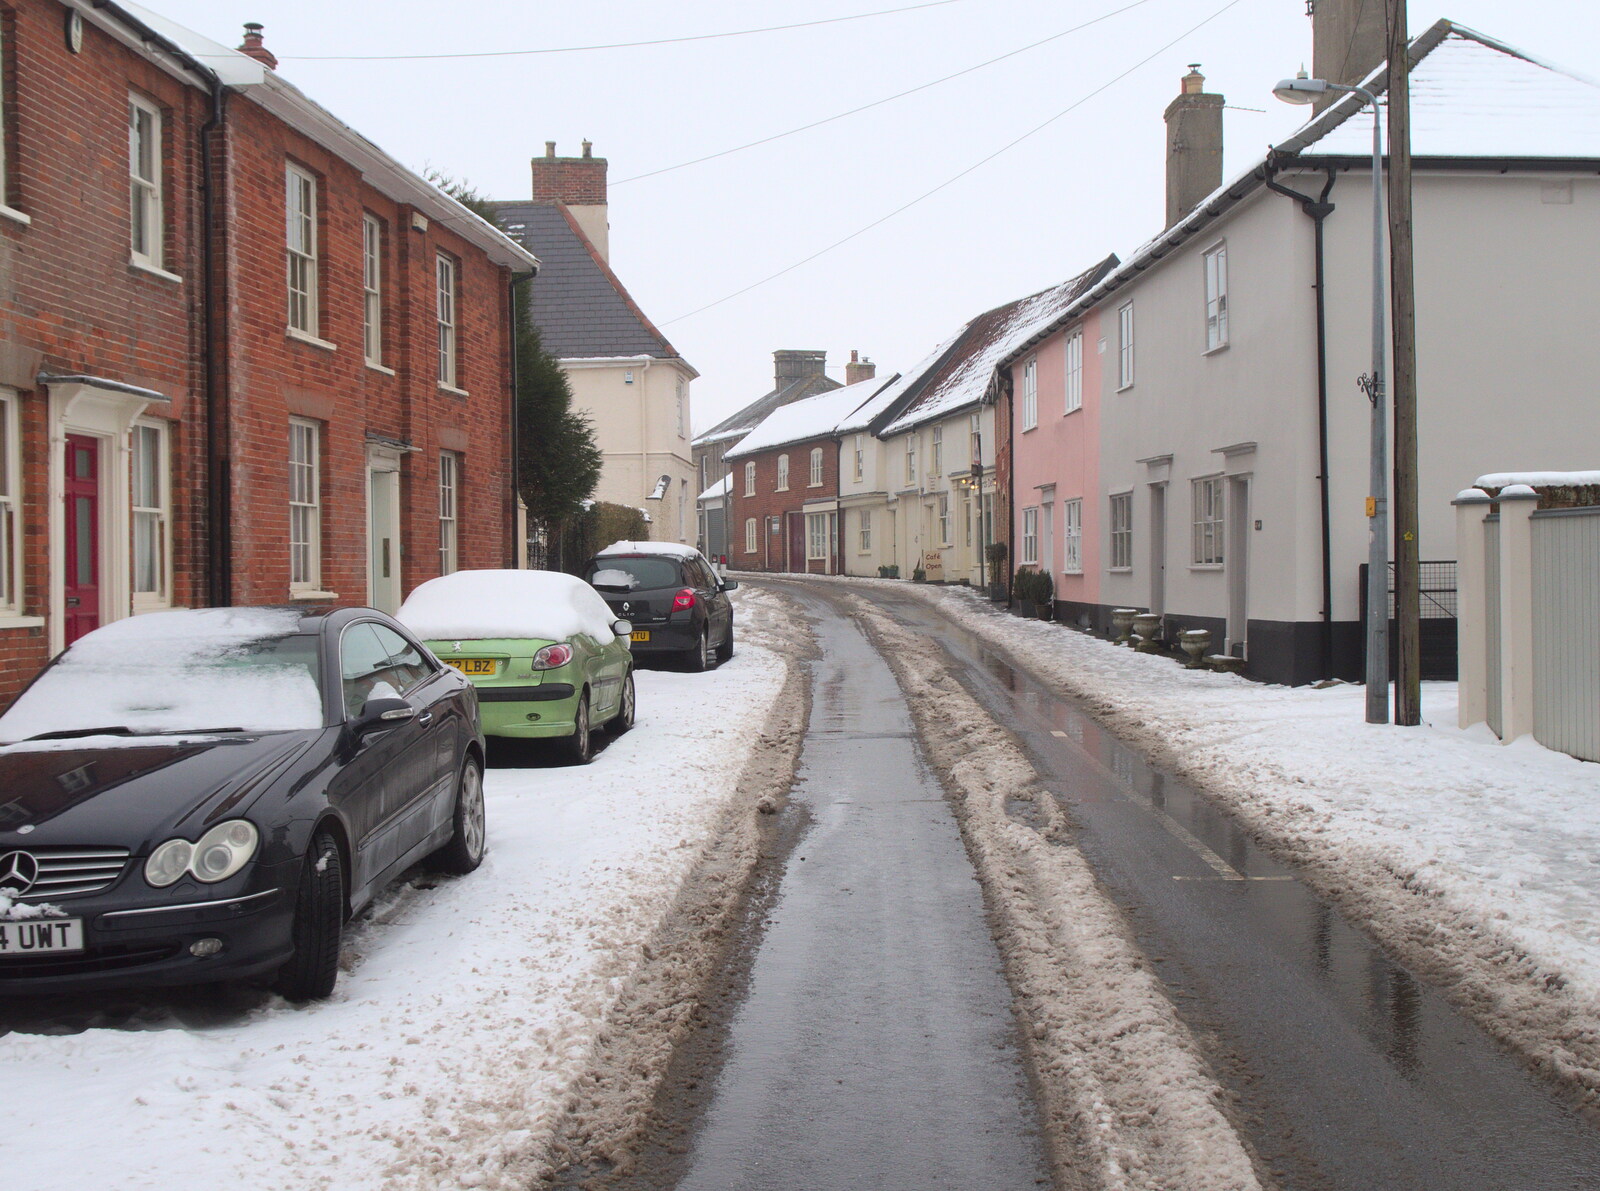 Church Street in Eye from More March Snow and a Postcard from Diss, Norfolk - 3rd March 2018